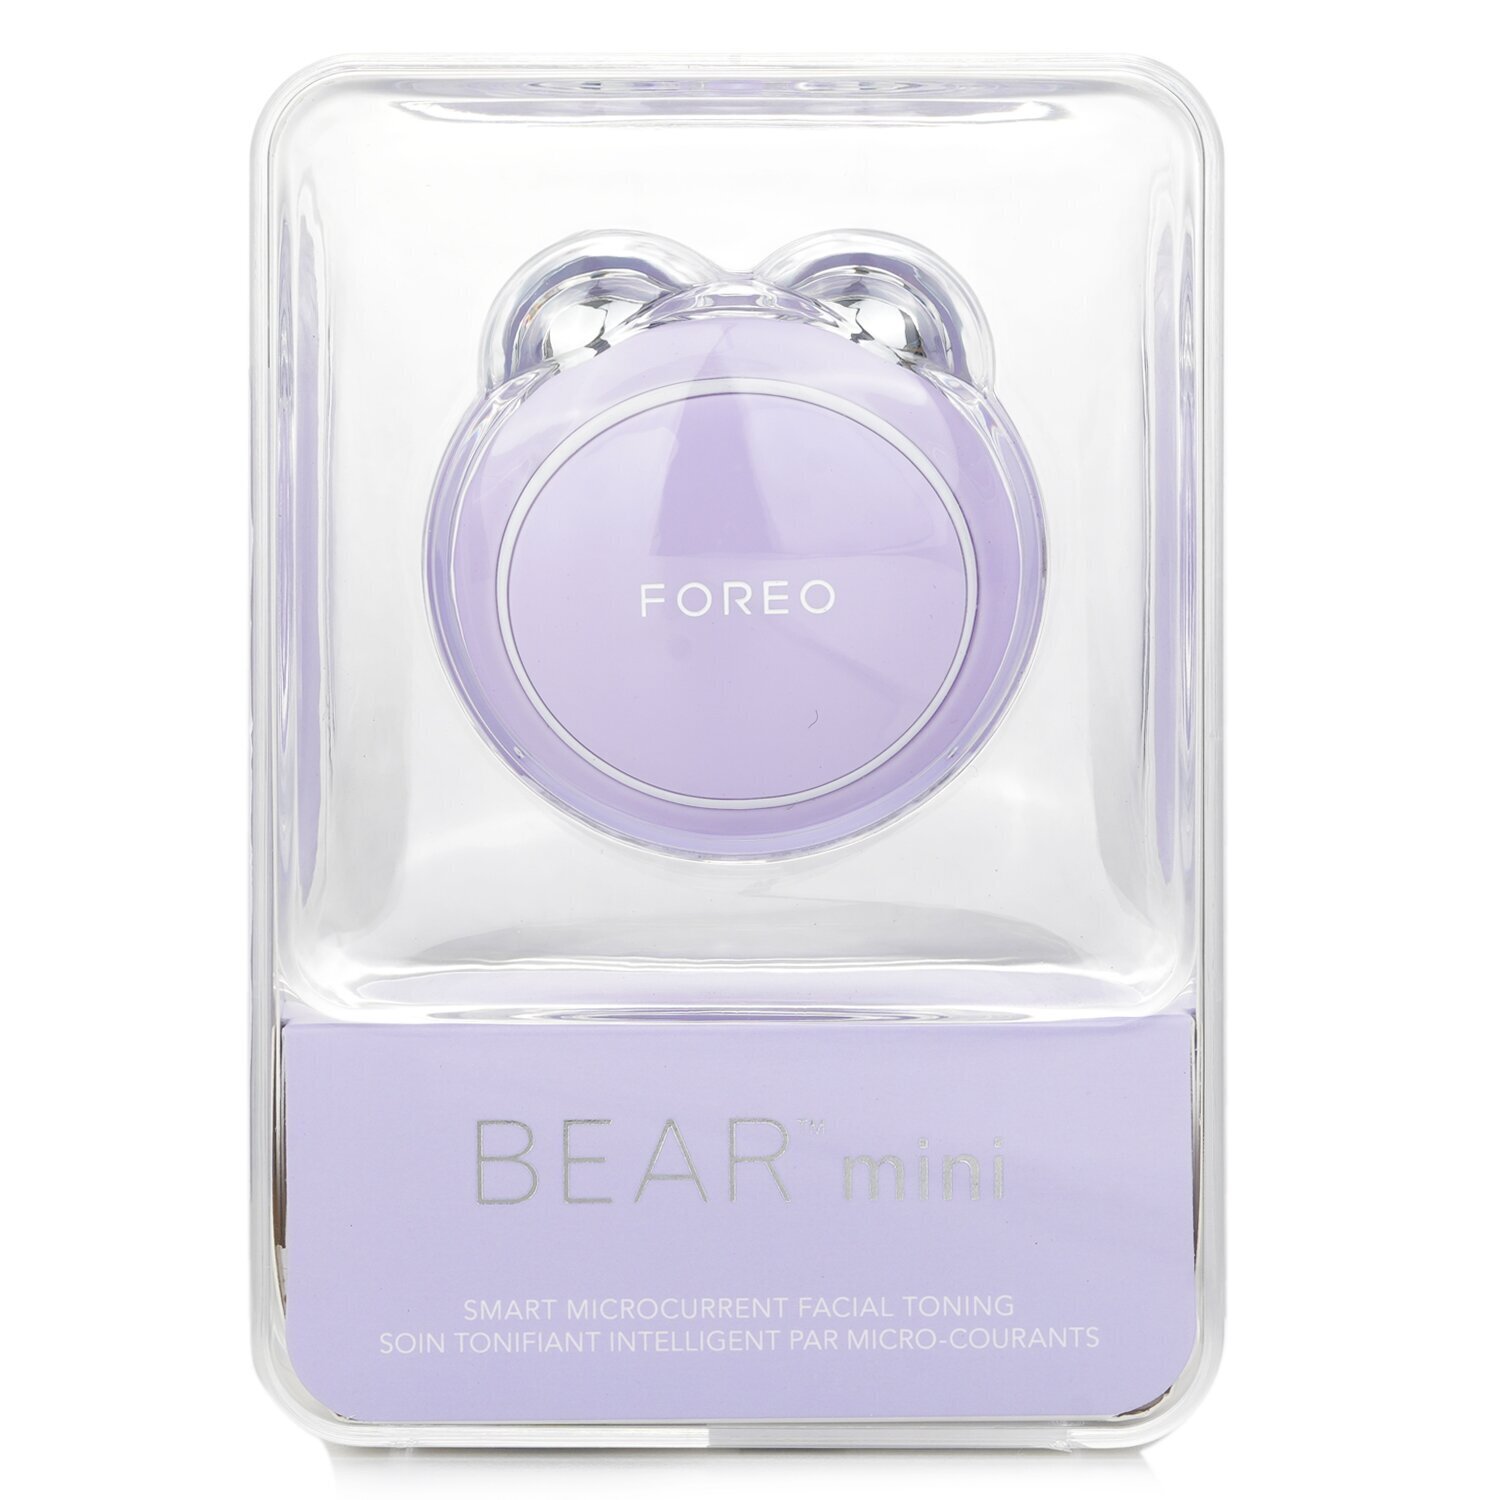 FOREO BEAR: we get our glow on with the latest microcurrent technology